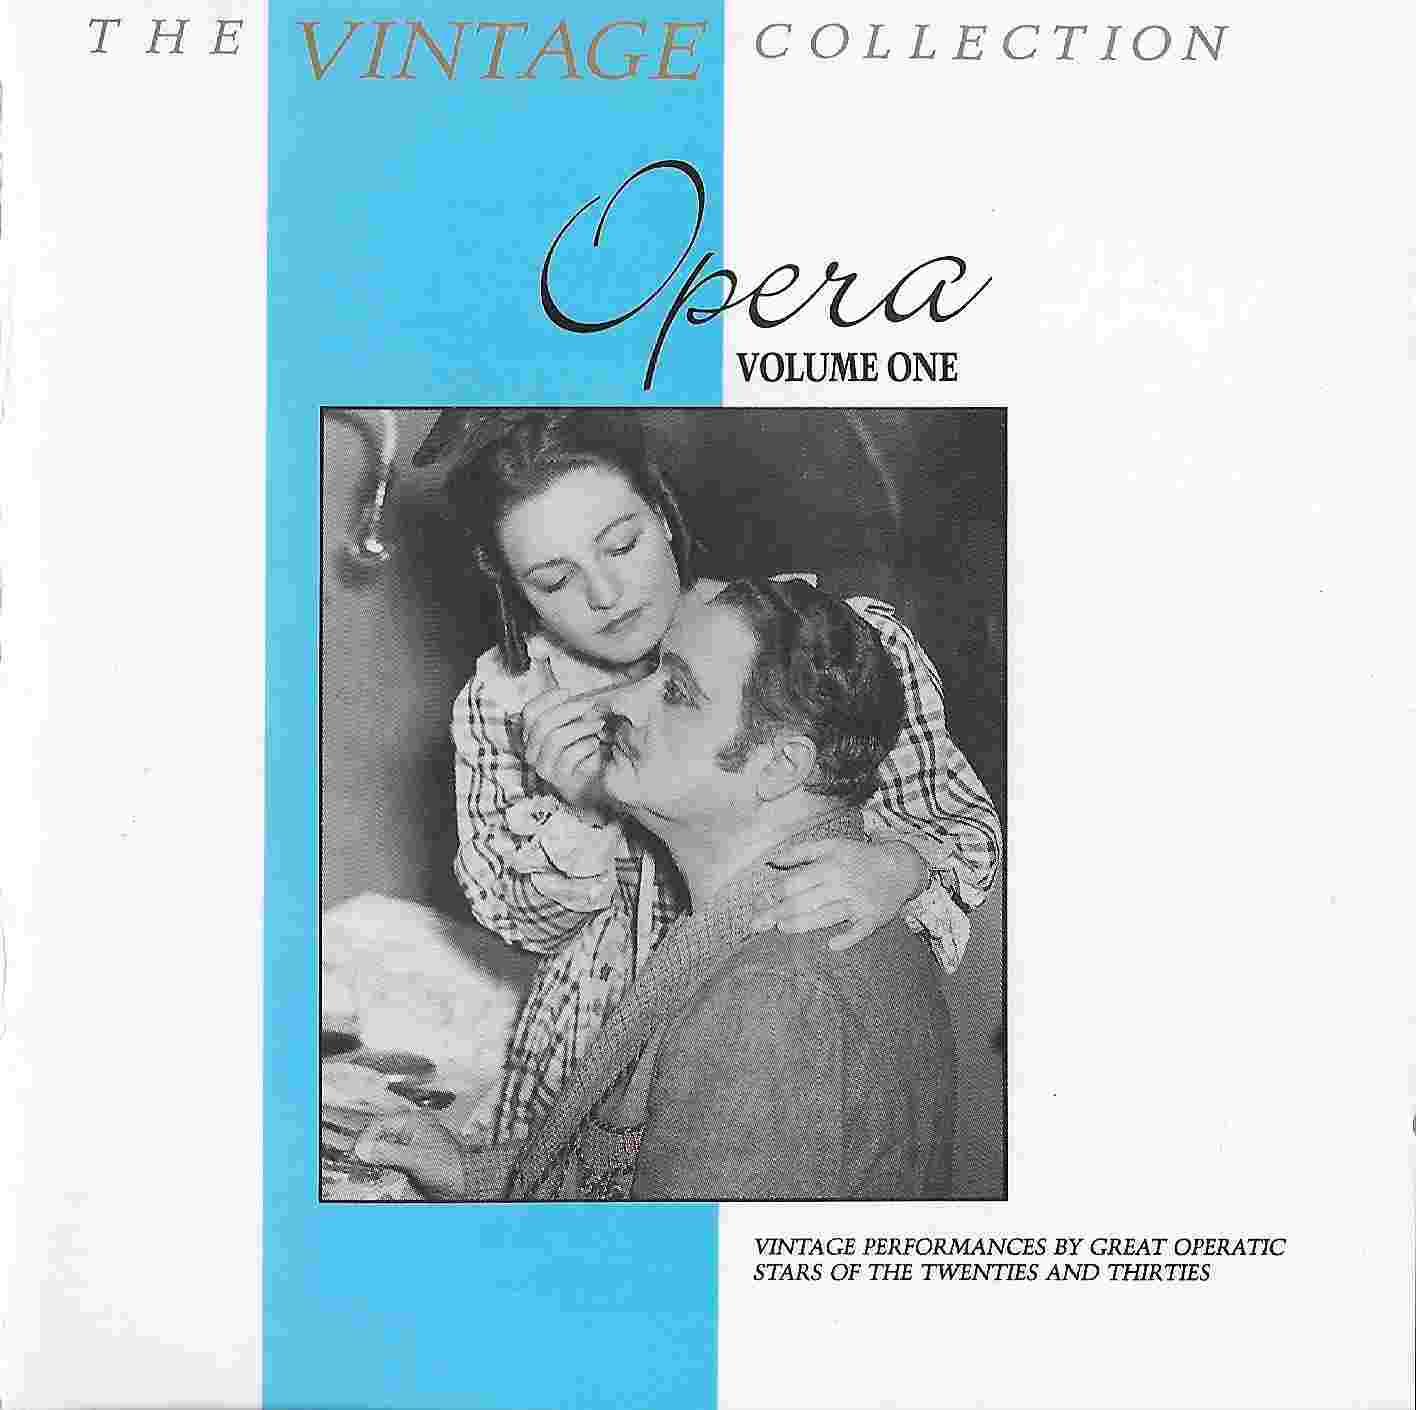 Picture of BBCCD715 The vintage collection - Opera by artist Various from the BBC cds - Records and Tapes library